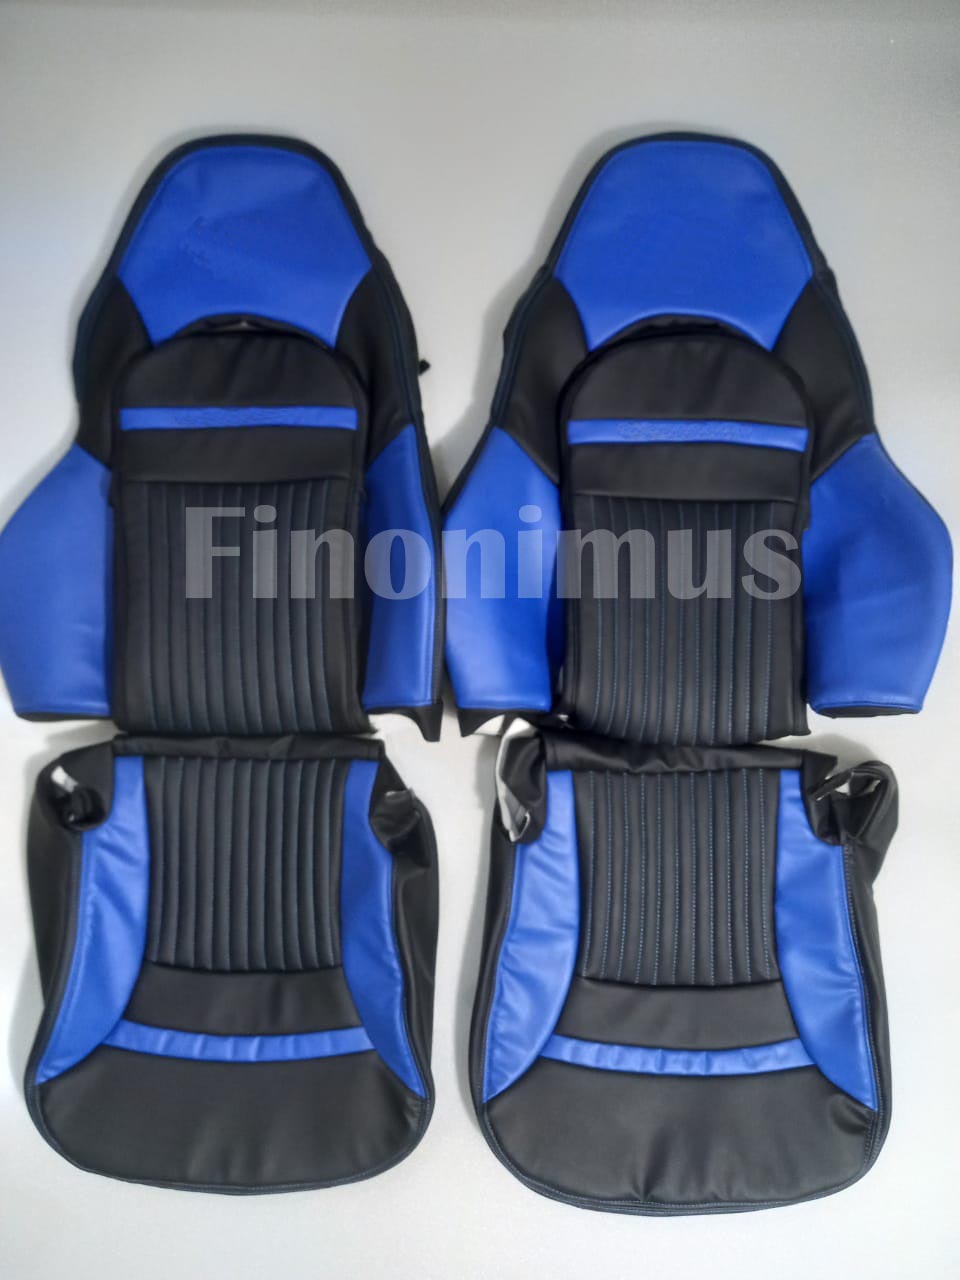 Perfect fit for C5 Corvette Sports seat cover with 4pc boot kit - Synthetic leather; Color Blue/Black (Year 1997 to 2004)